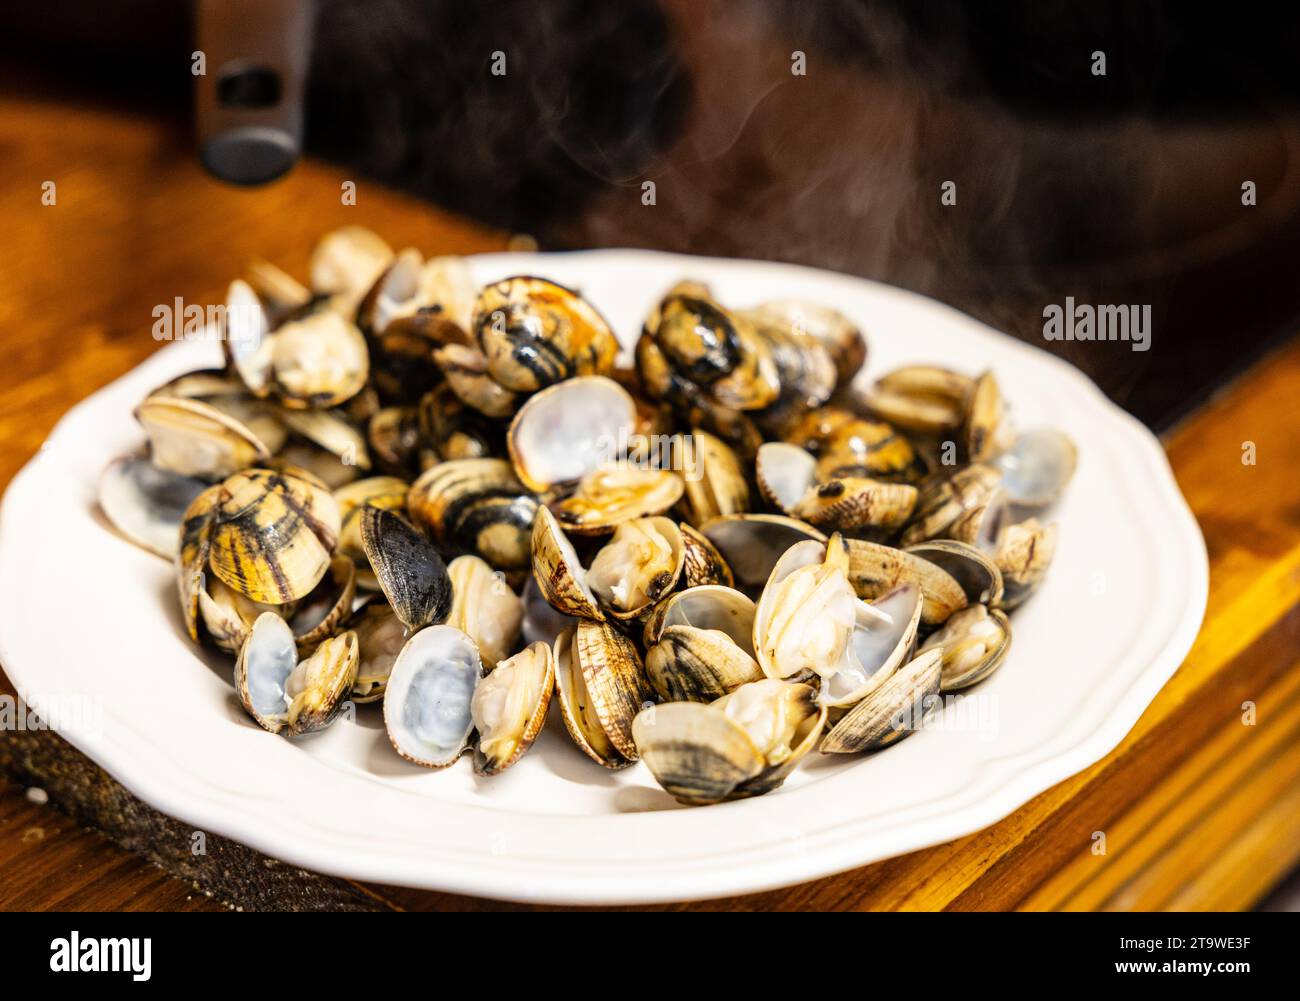 Close-up of a seafood dish, clams cooked healthy on the grill Stock Photo